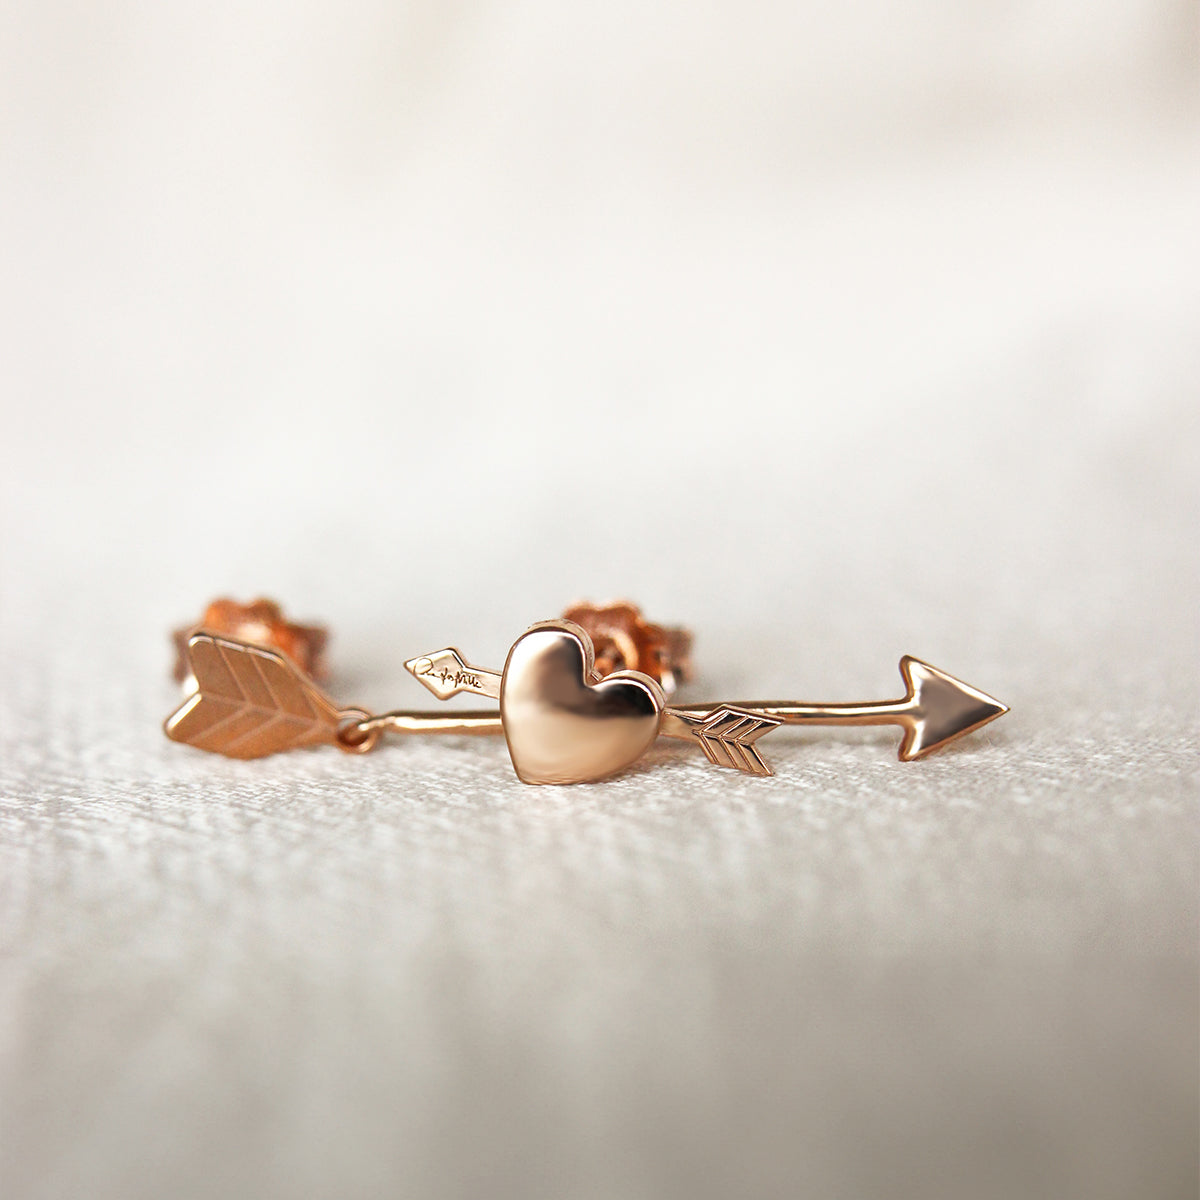 Earrings - Stud with Heart and Arrow Earring - 5 | Rue des Mille